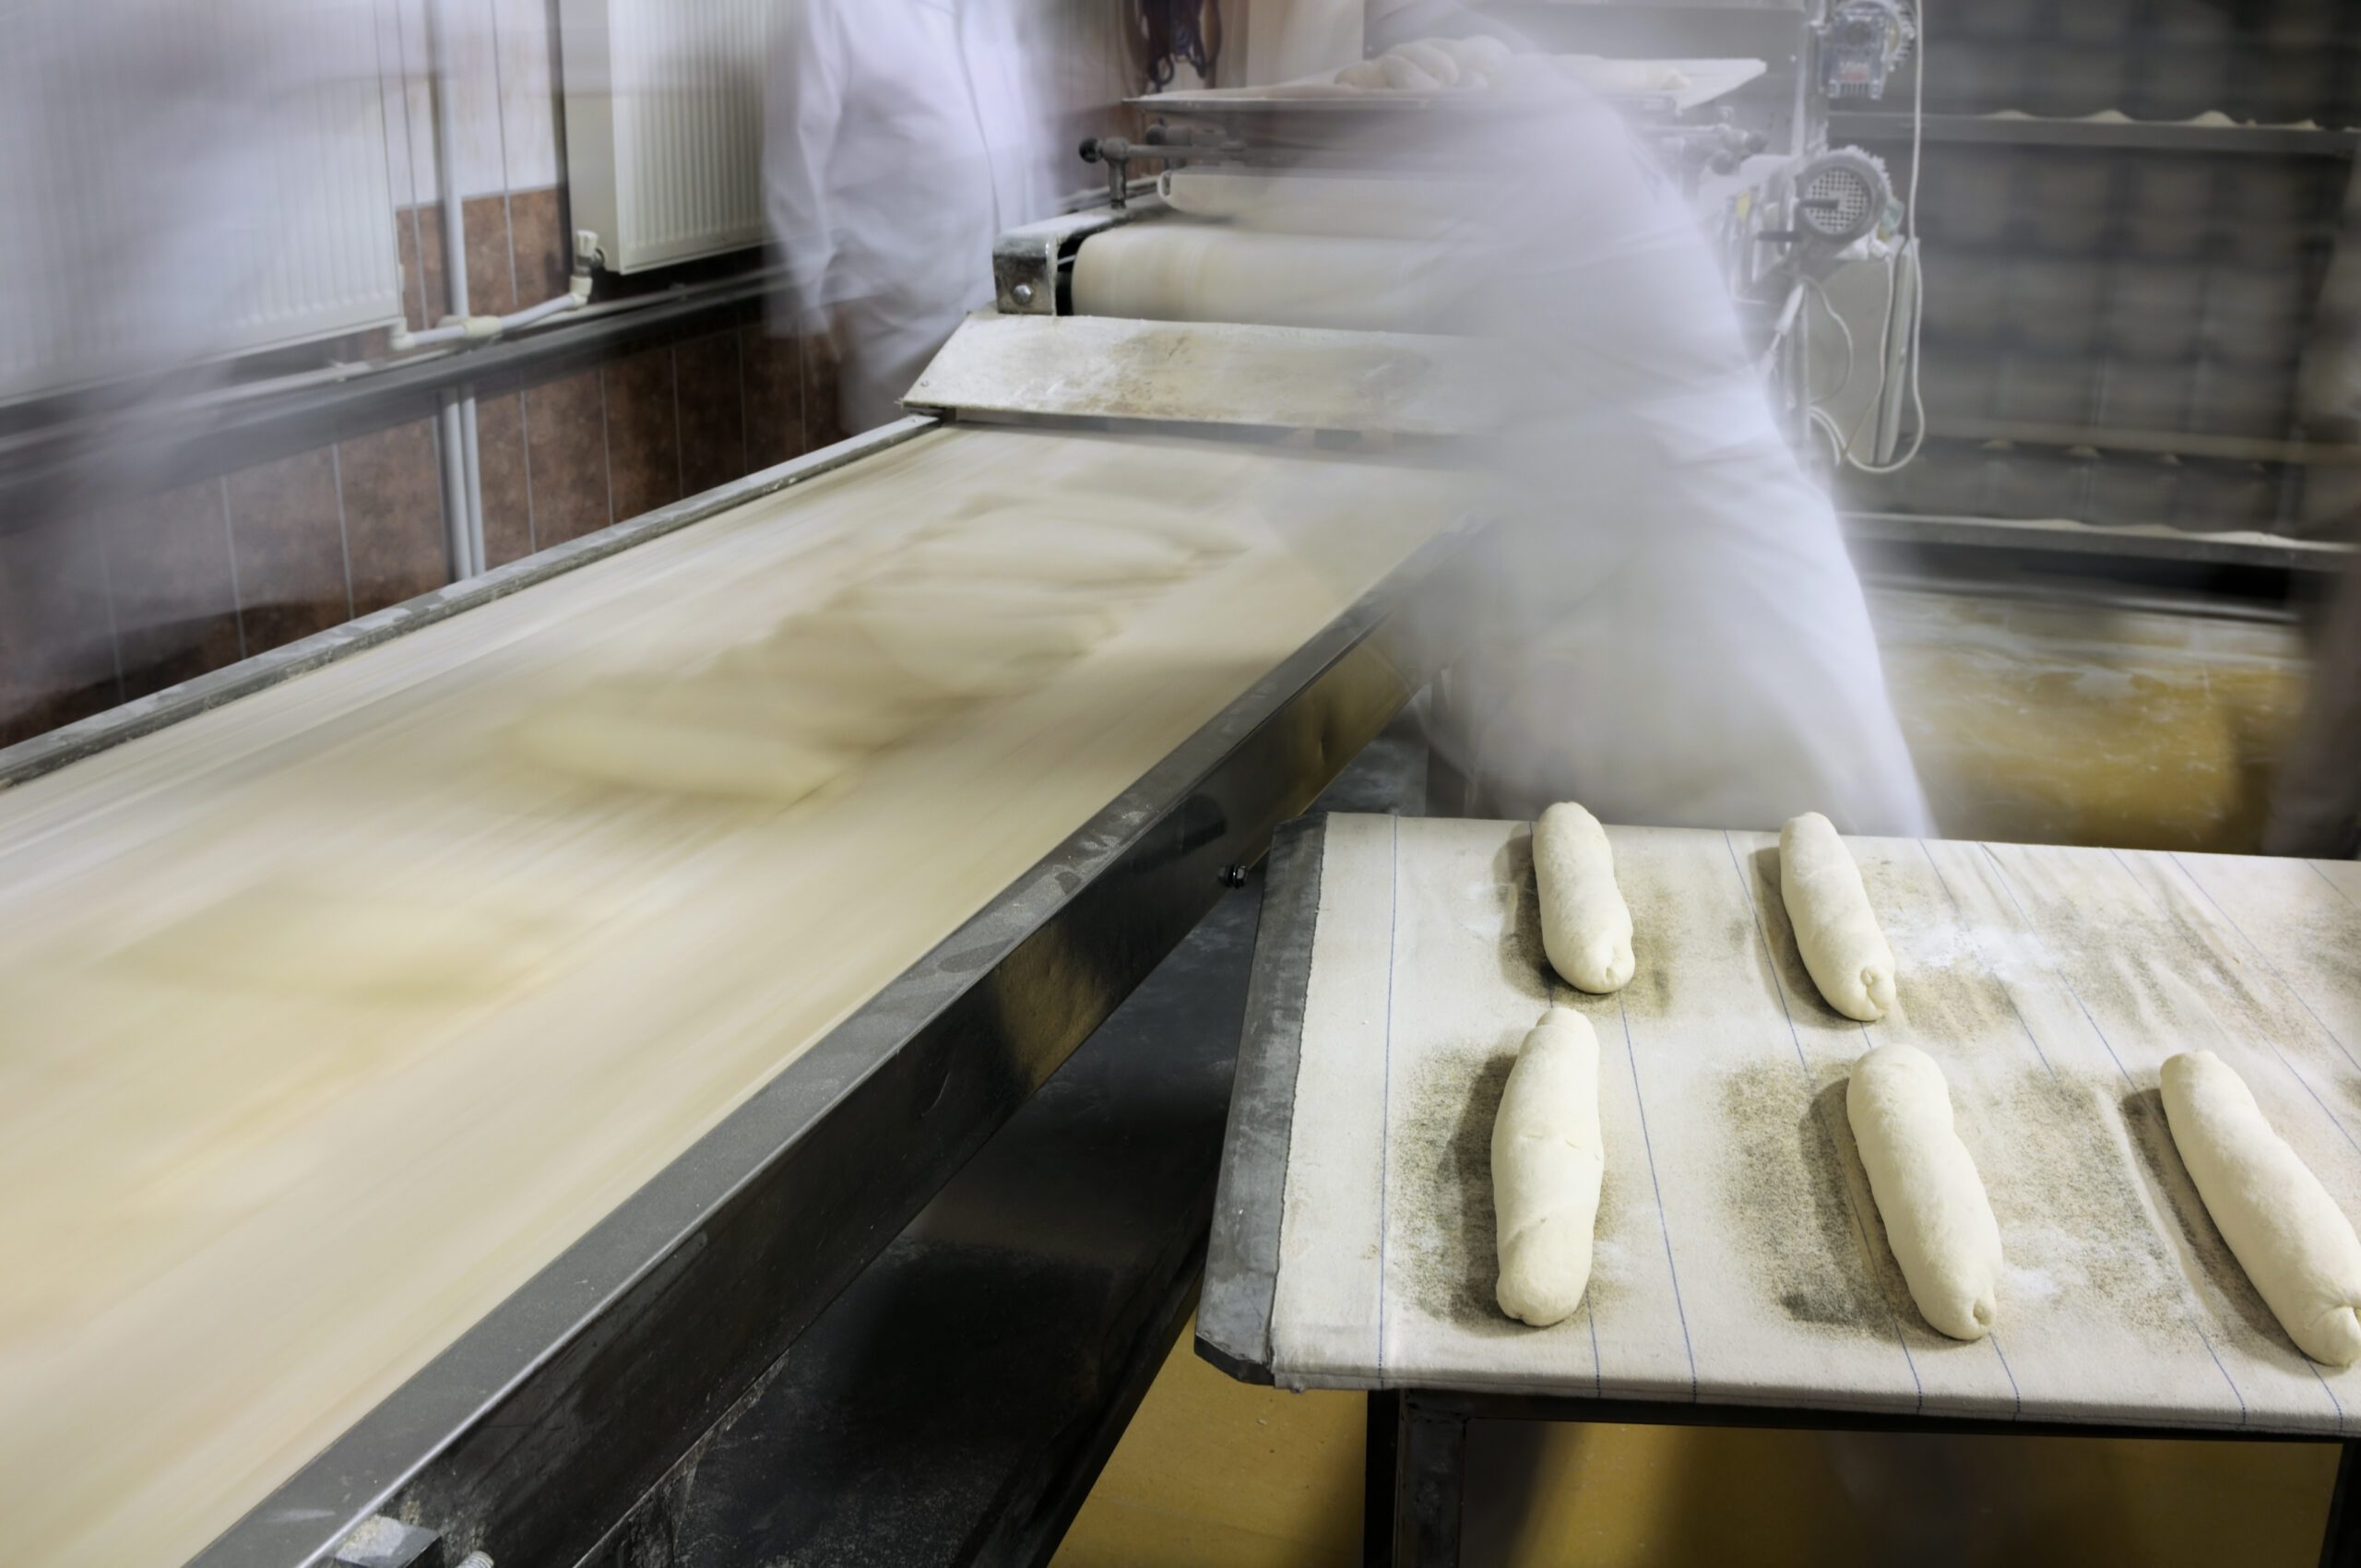 Dough of breads on the production line